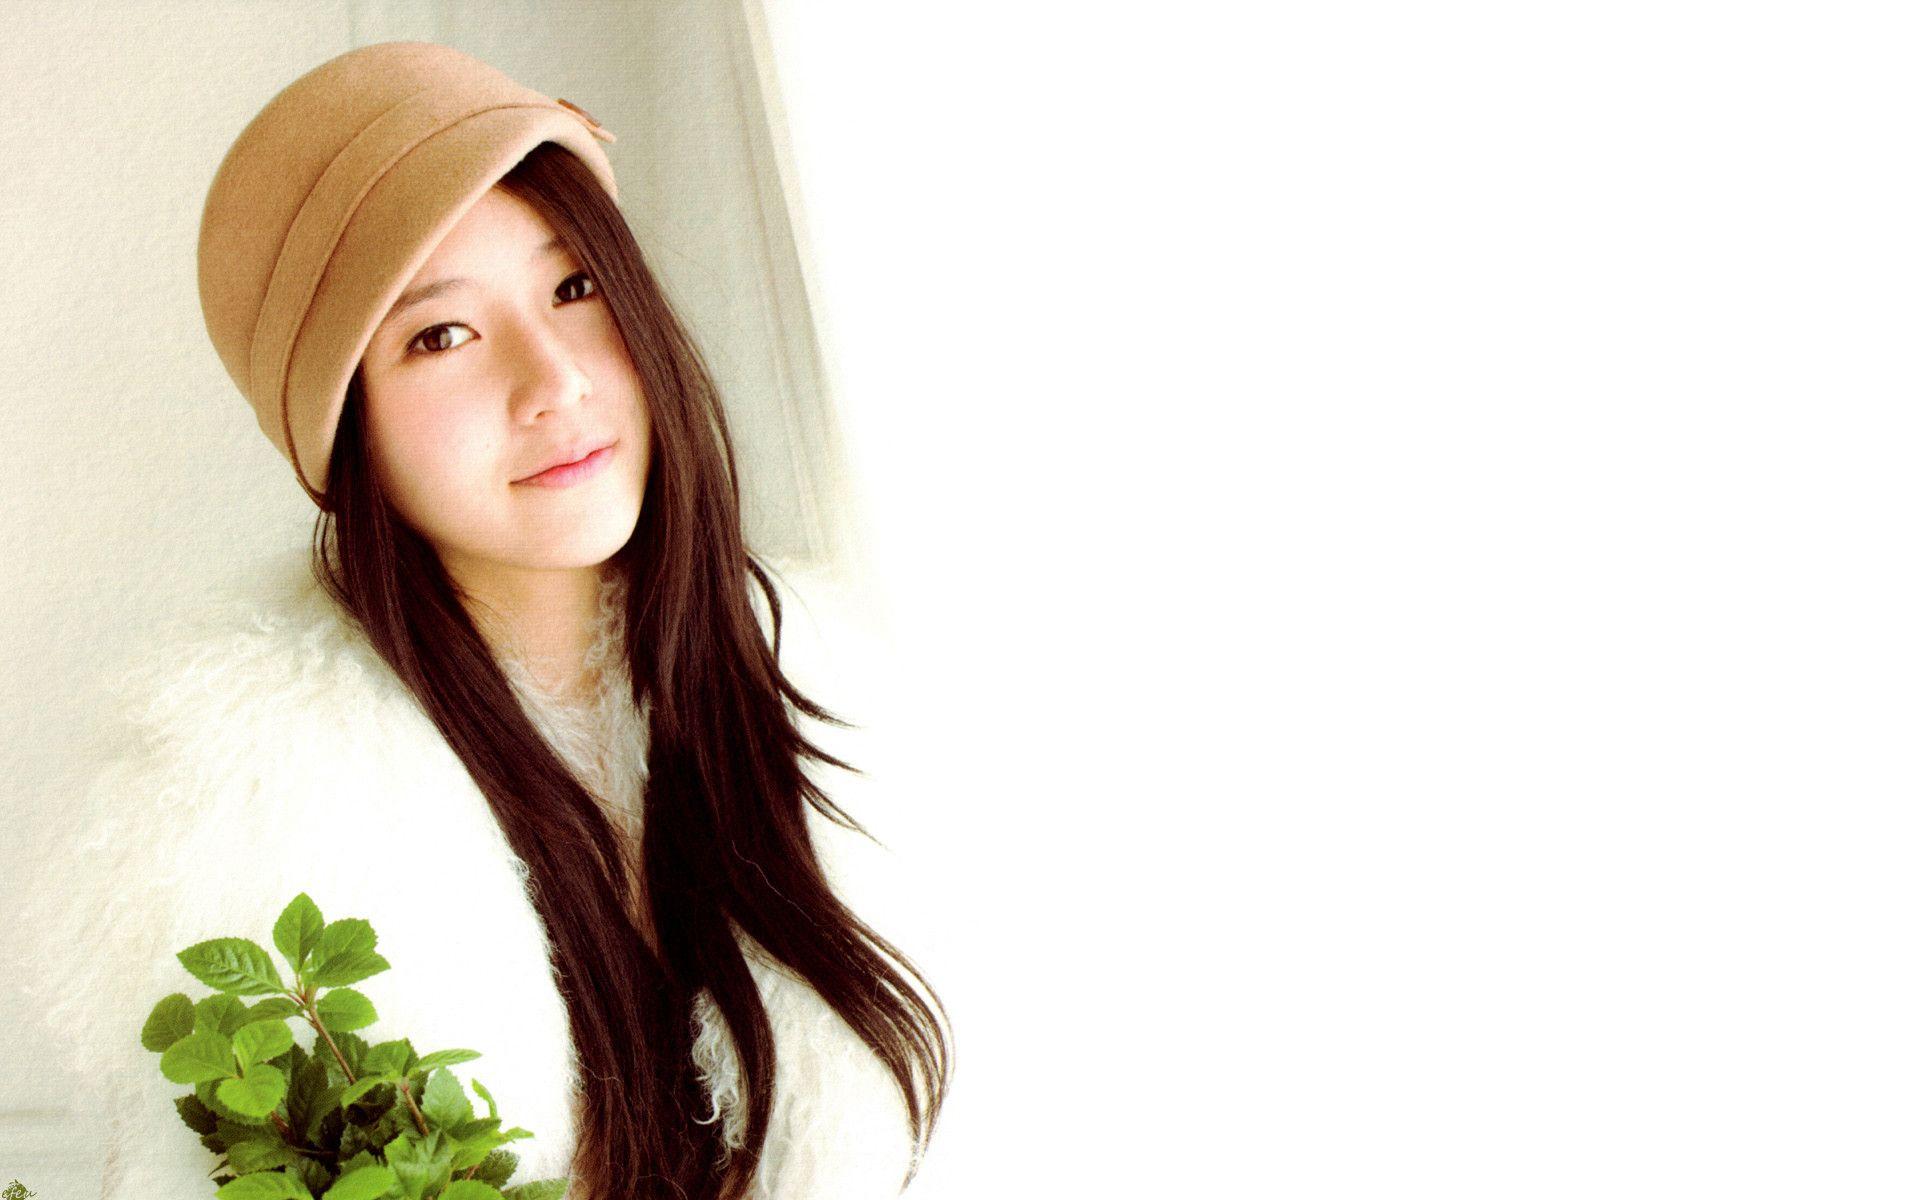 This beautiful lady is Krystal Jung of the KPOP group F(x). She is